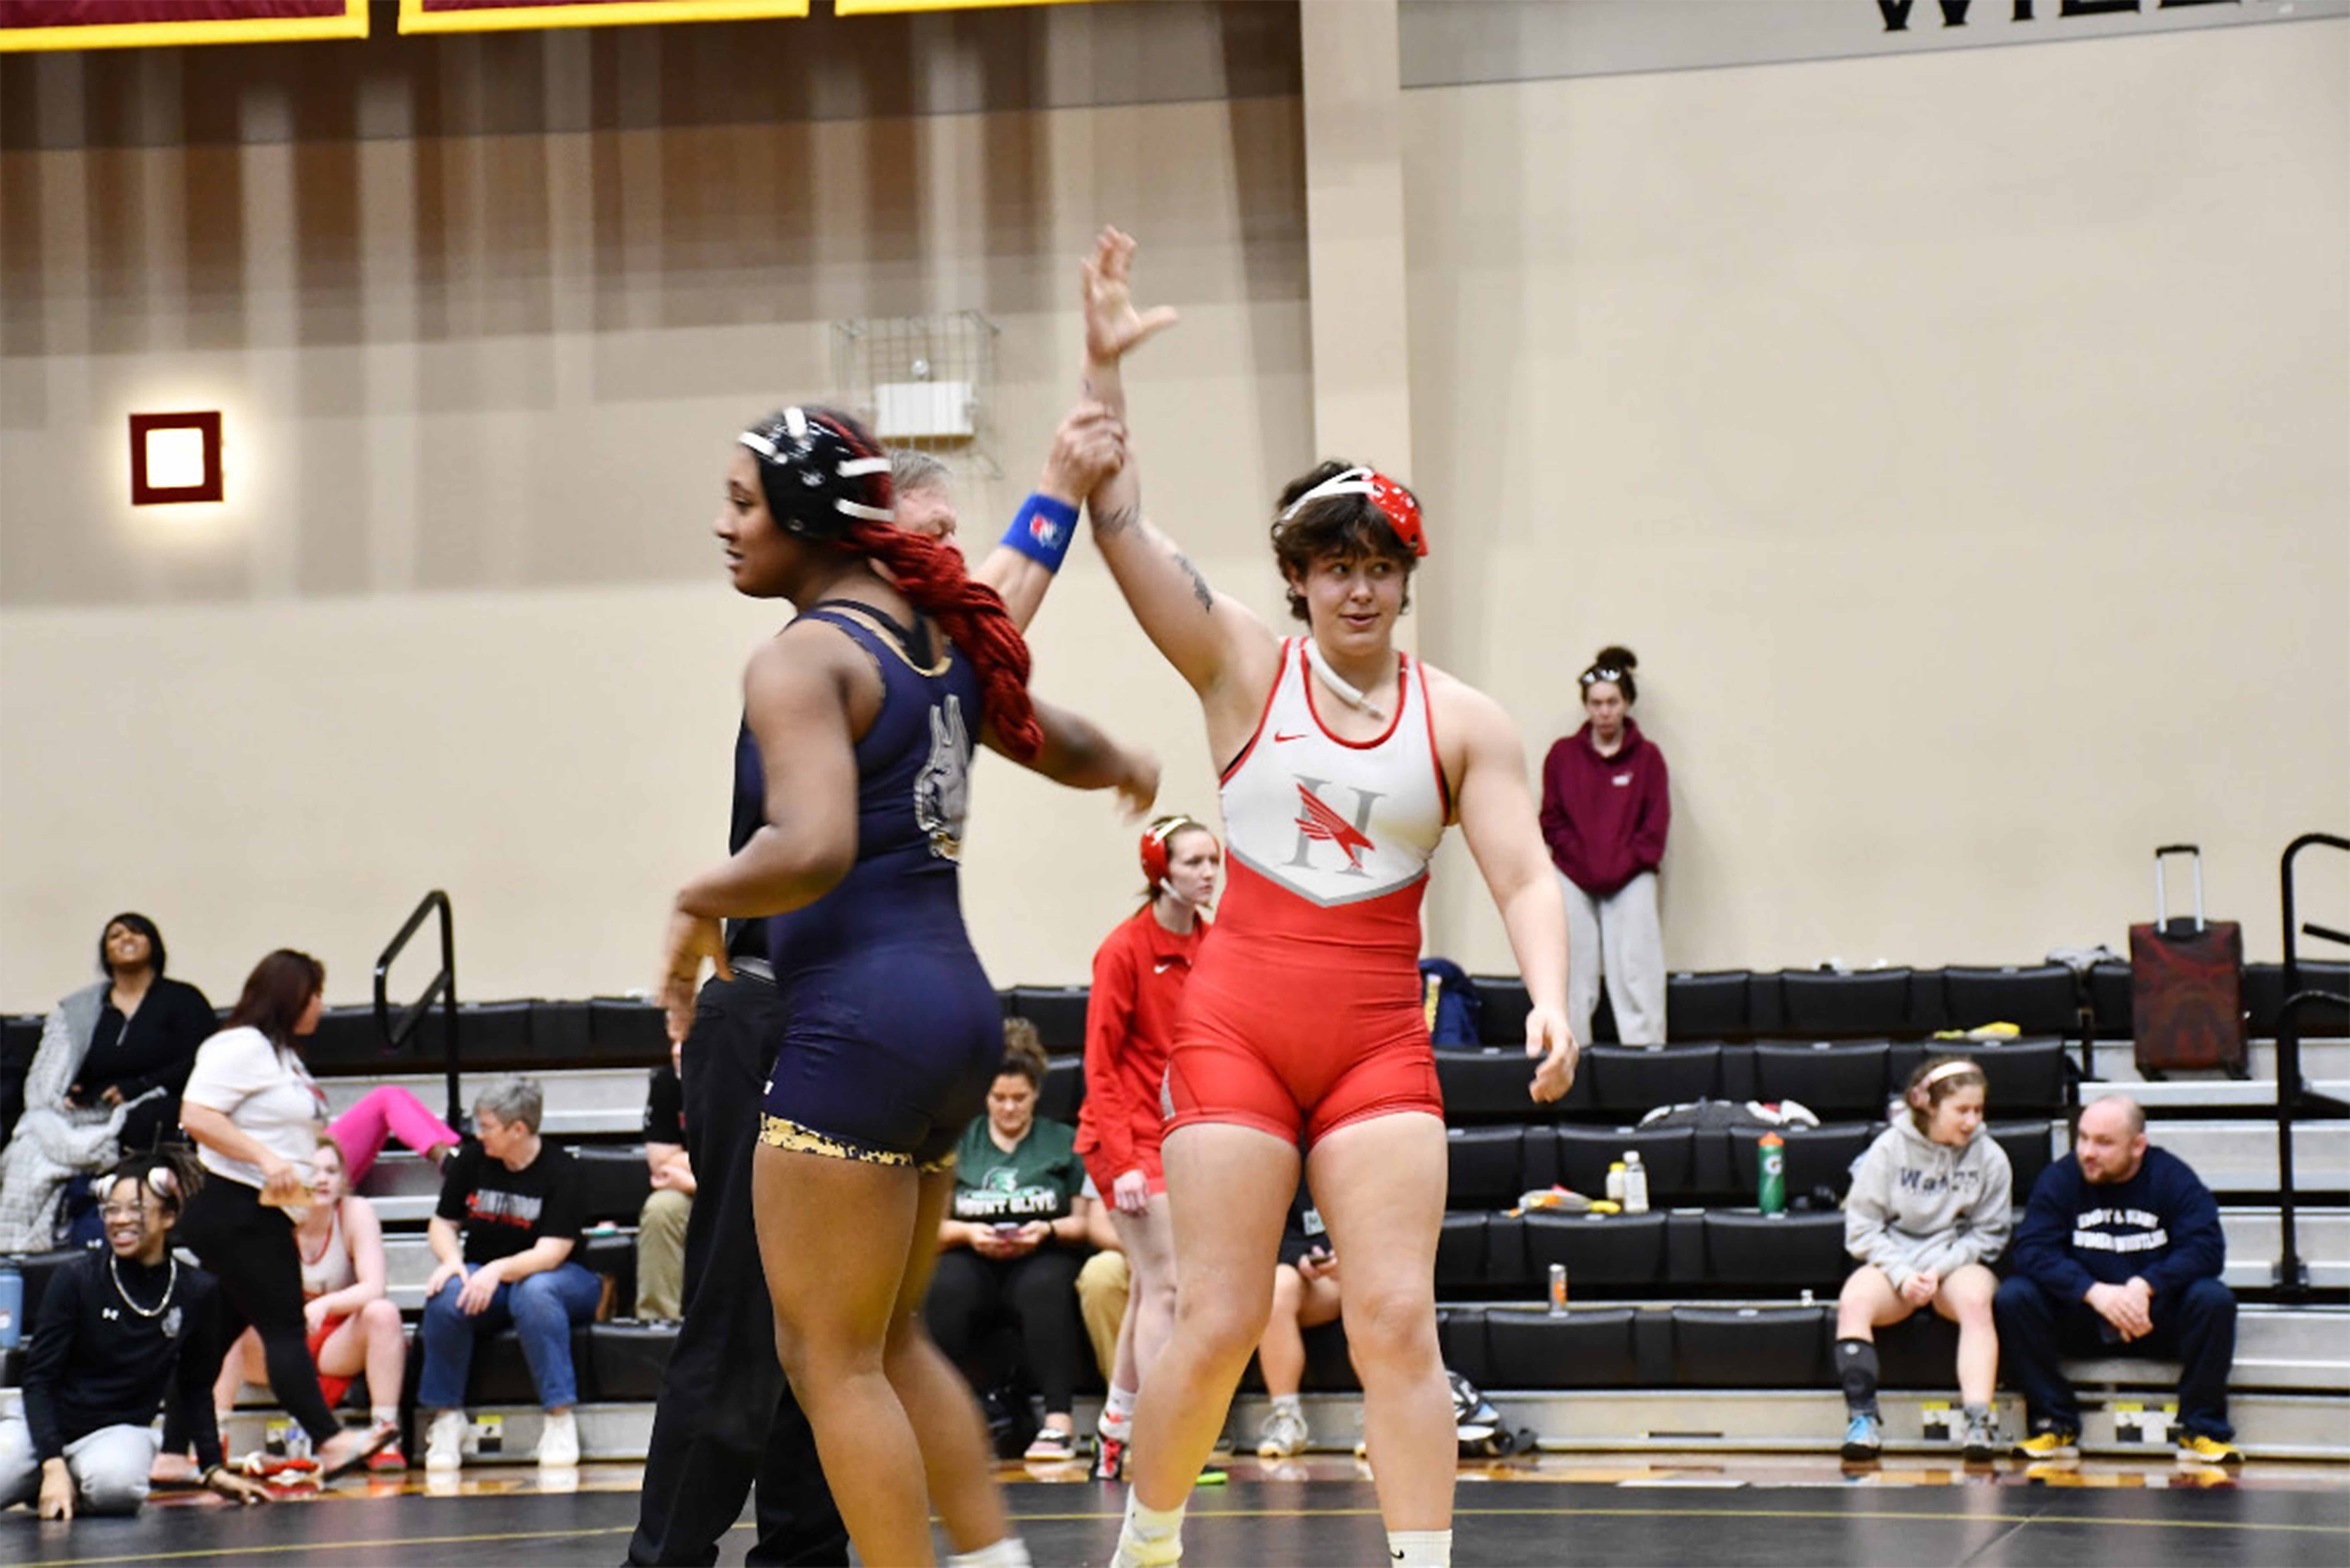 Carpenter and Fugate Qualify For DIII Women's Wrestling National Tournament